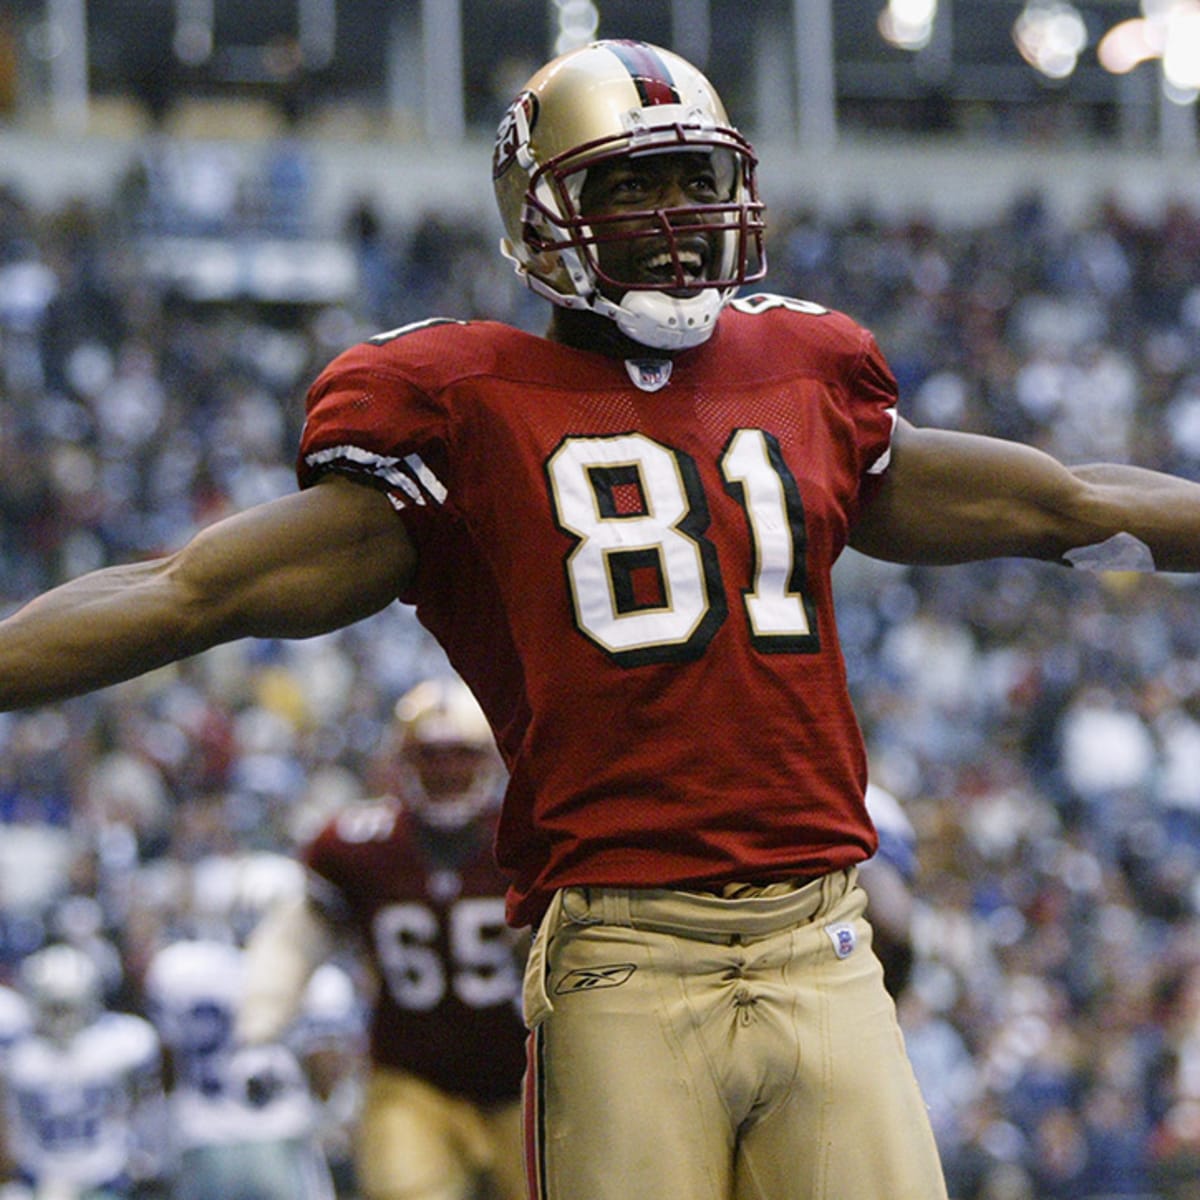 Pro Football Hall of Fame 2018 class: Our favorite Terrell Owens